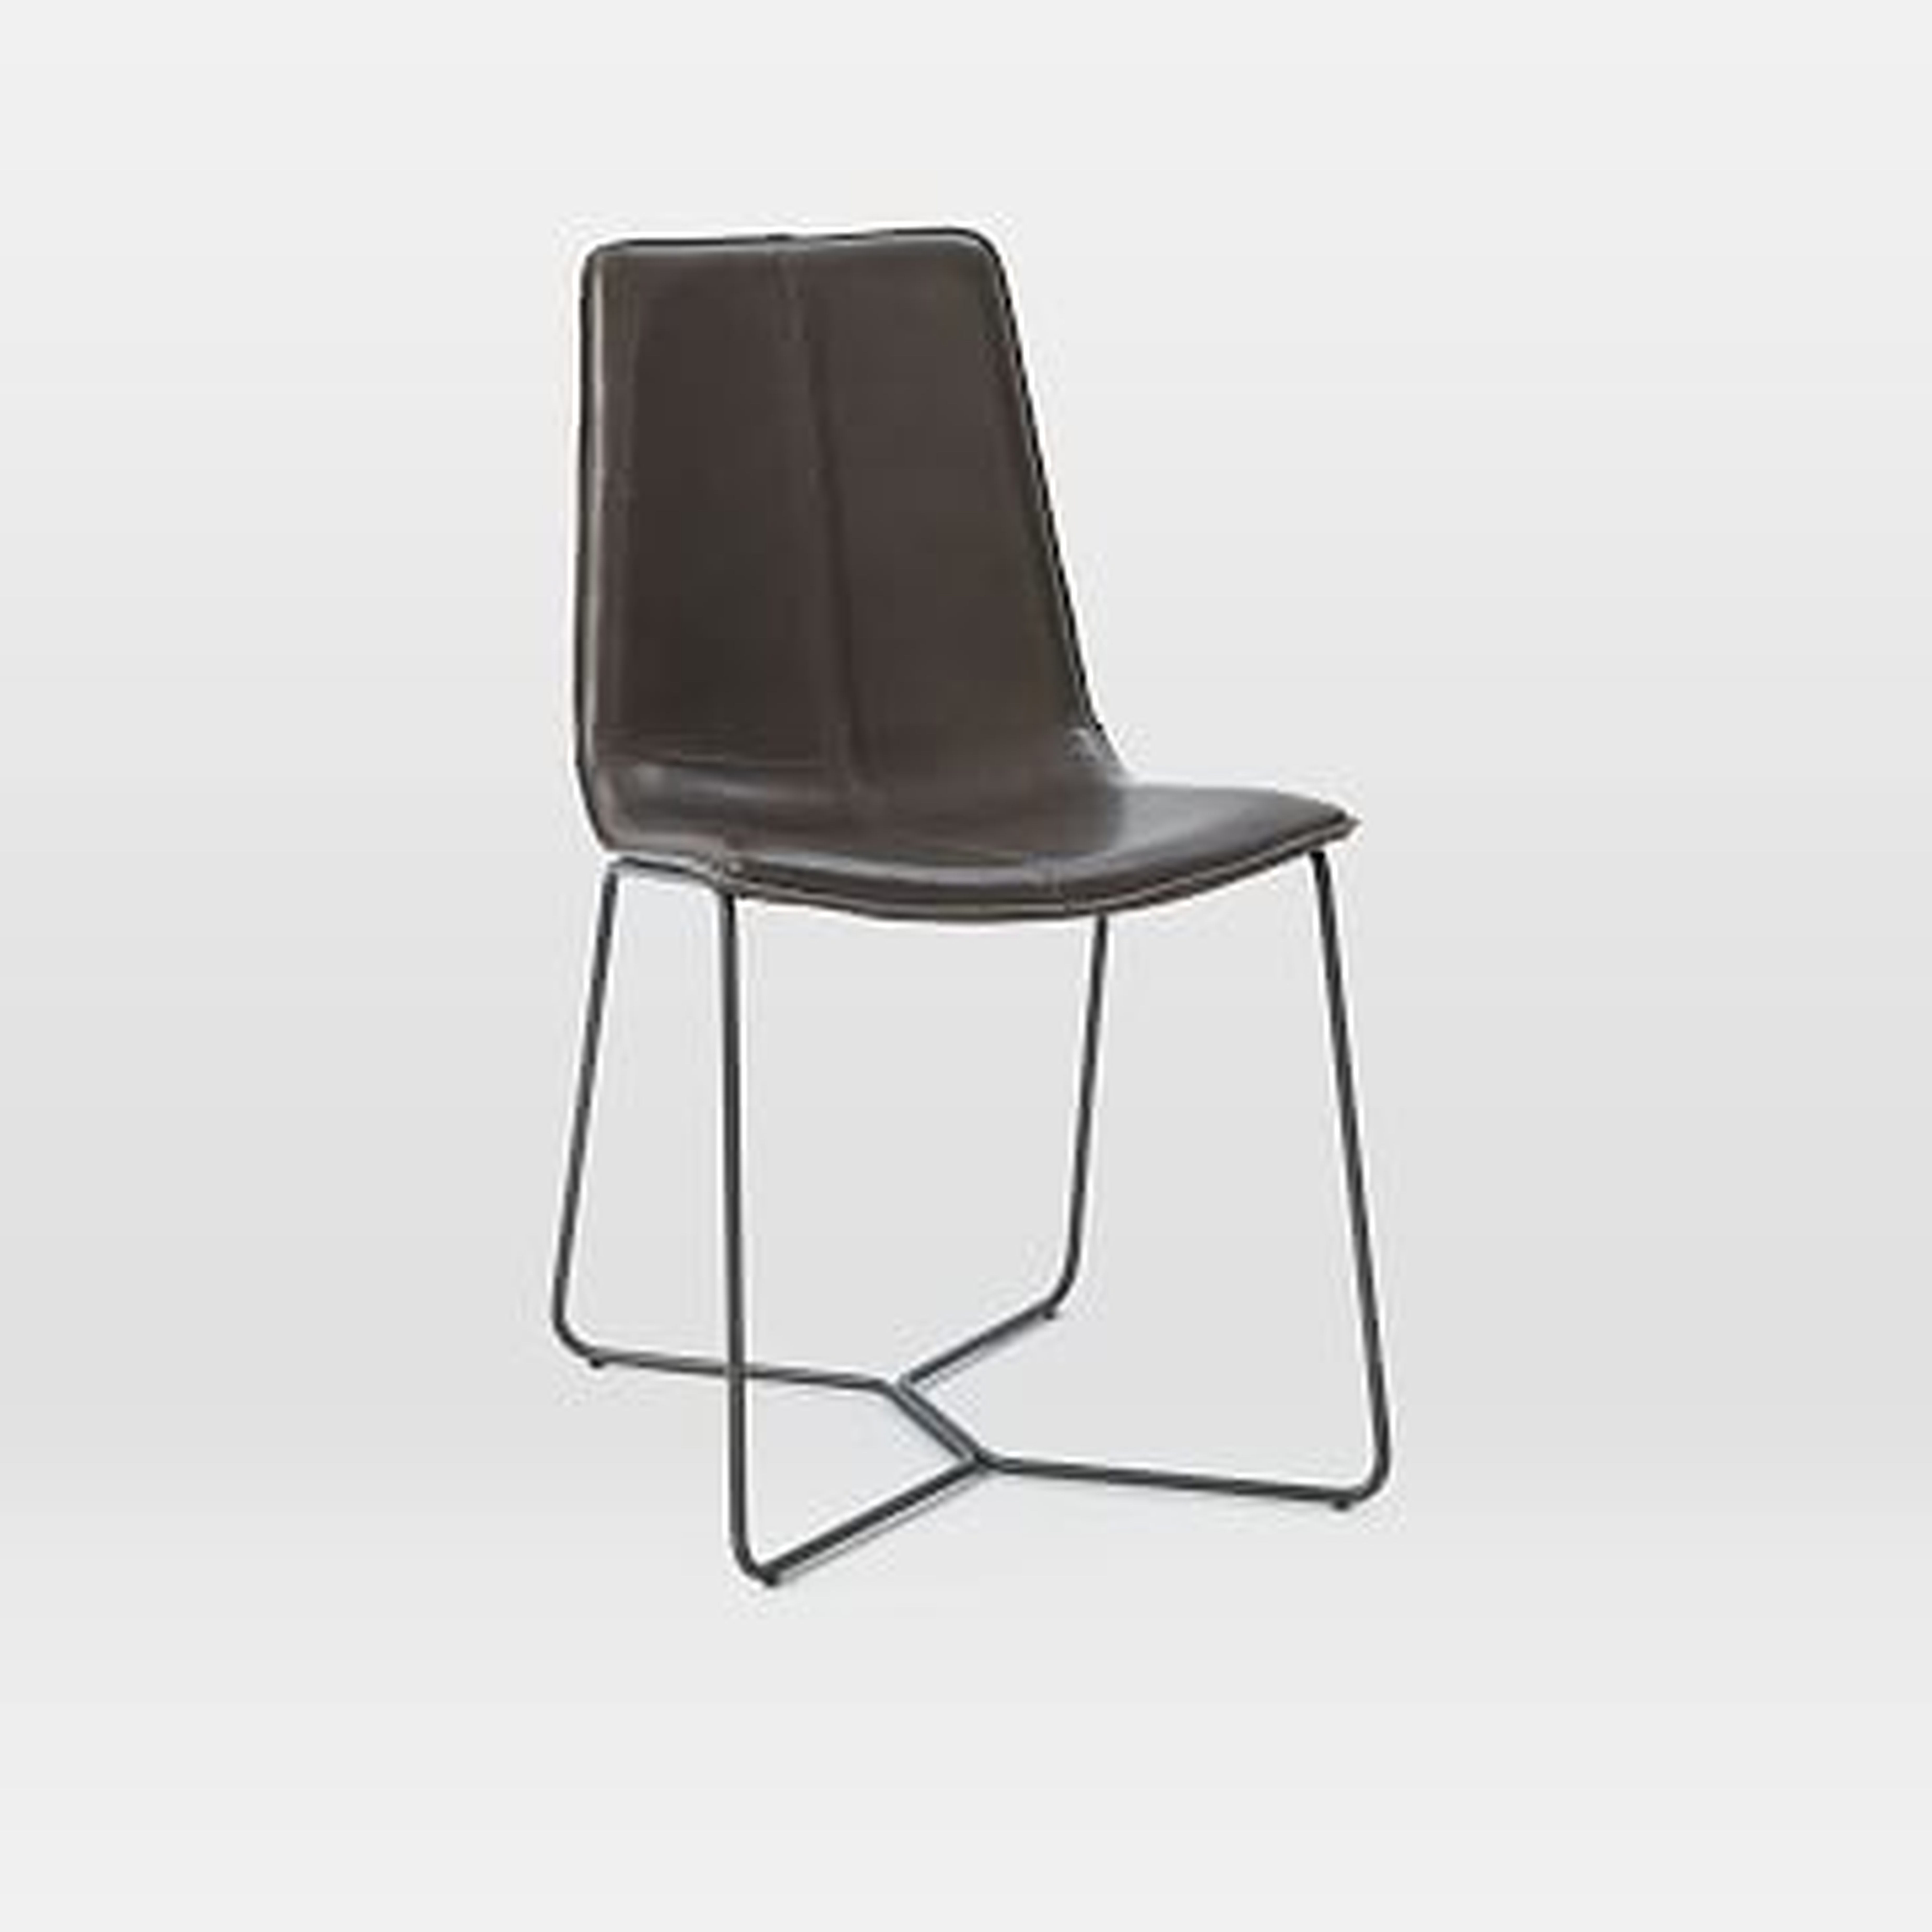 Slope Leather Dining Chair, Leather, Charcoal, Charcoal Leg-Individual - West Elm